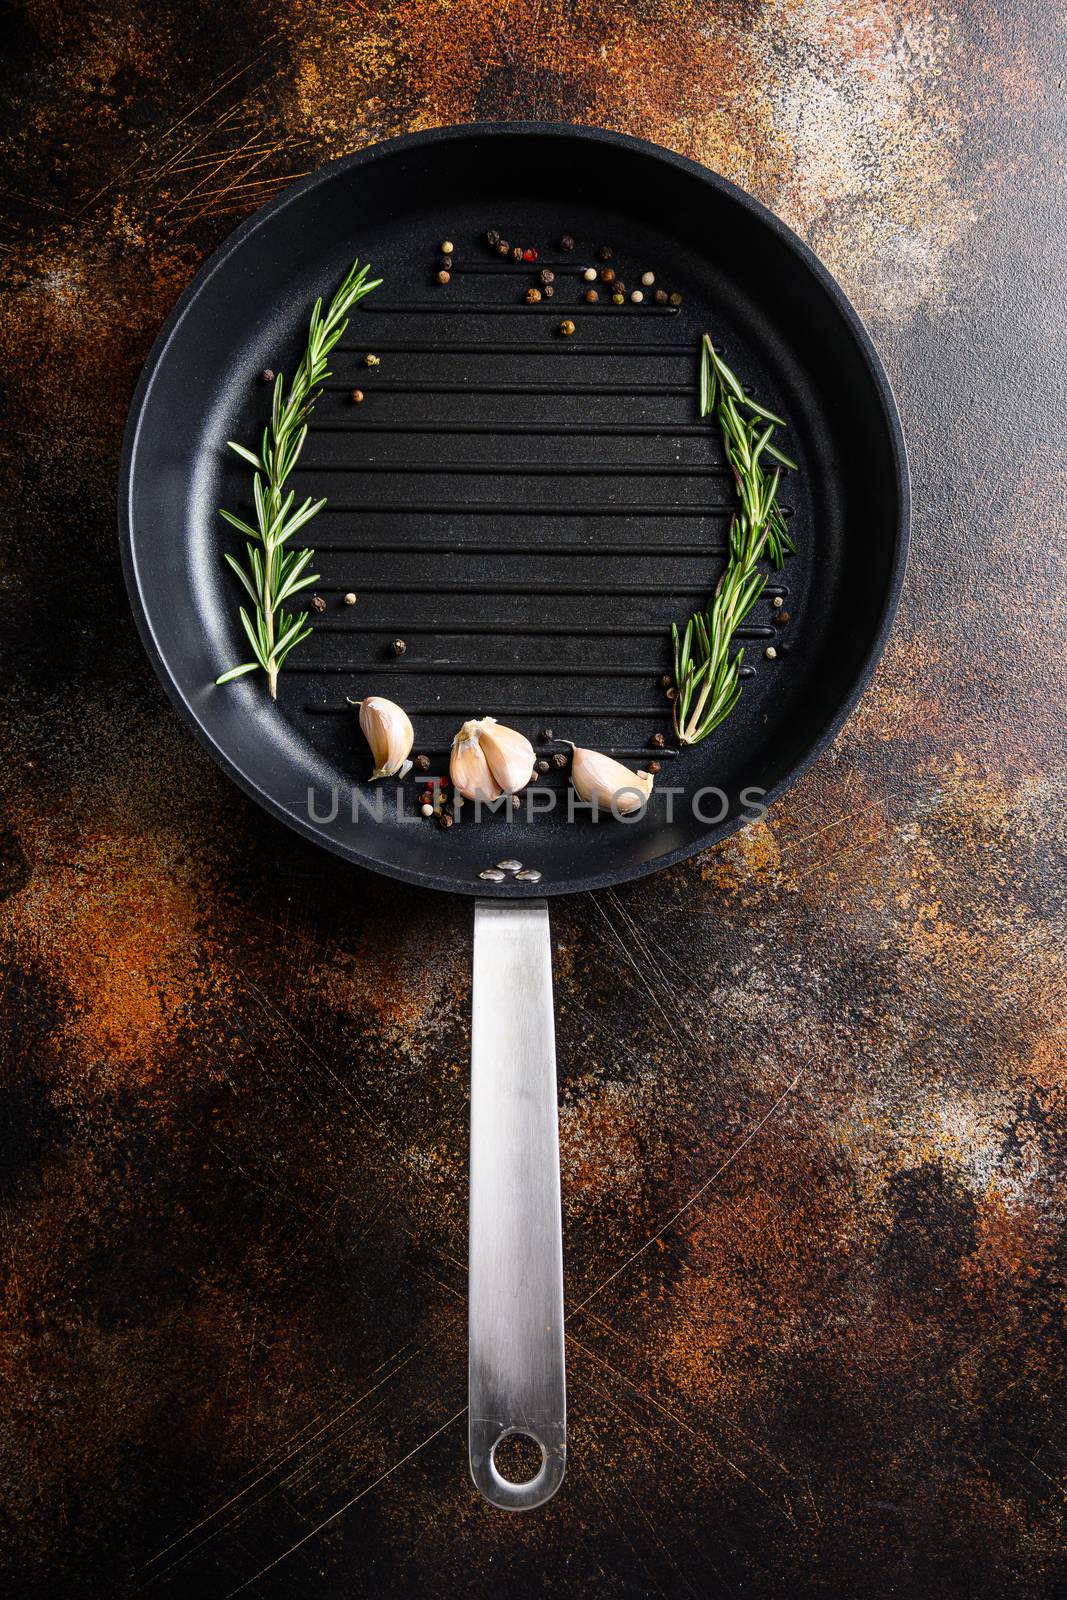 barbecue grill frying pan or skillet on rustic metall surface with herbs for cooking top view concept for text or objects by Ilianesolenyi